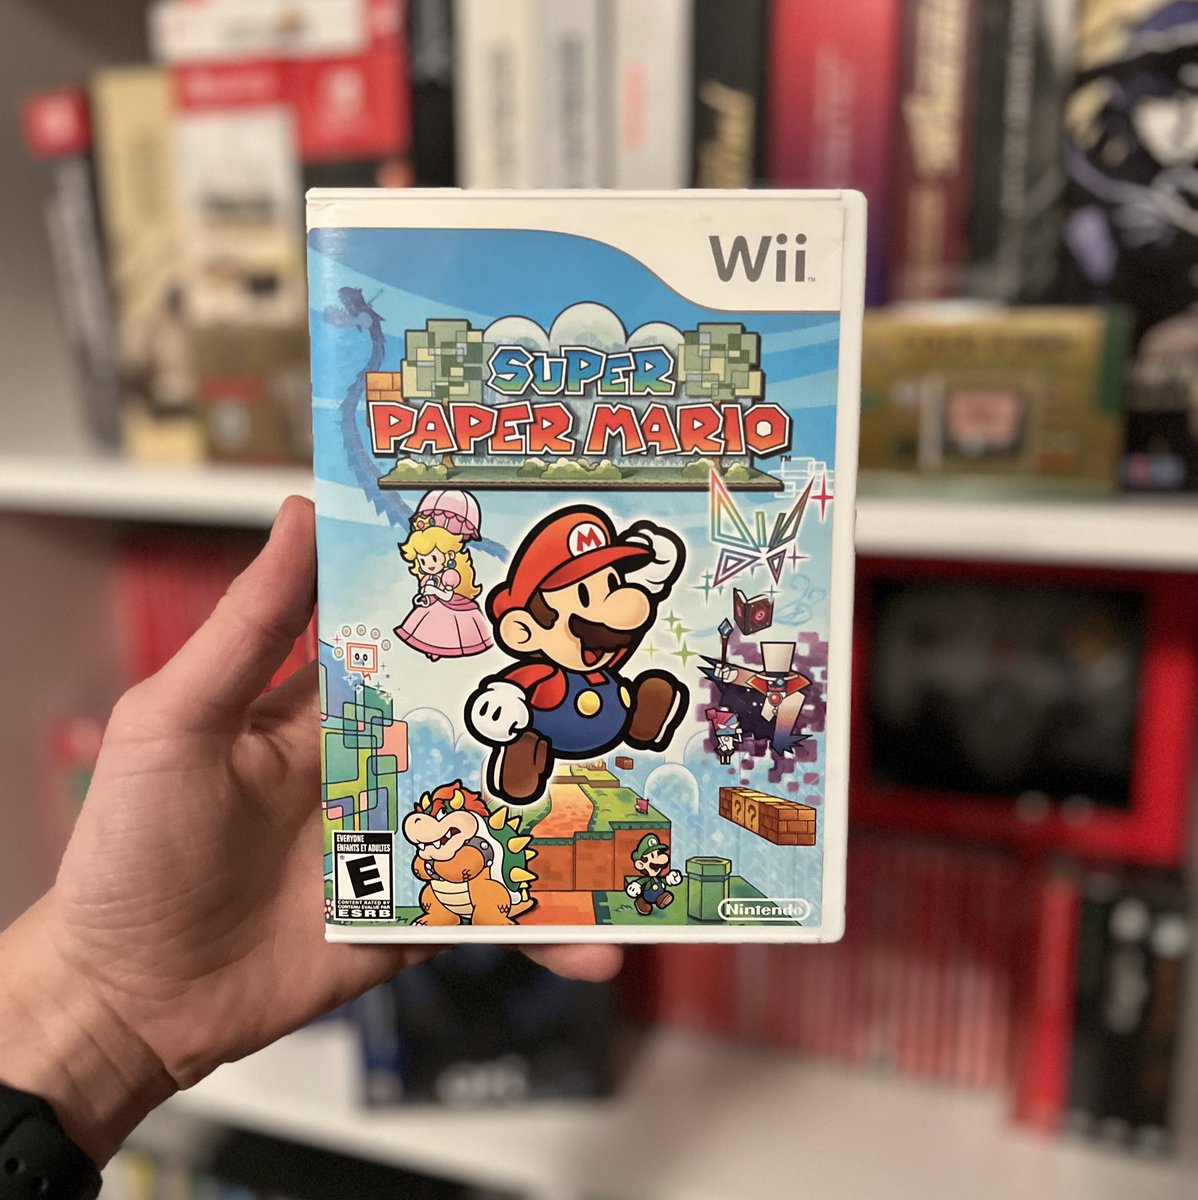 I’m sorting through my Wii games now! With The Thousand Year Door remake coming out soon.. I hope Super Paper Mario hits the Switch (eventually). Switch owners would have access to FOUR wonderful Paper Mario games!